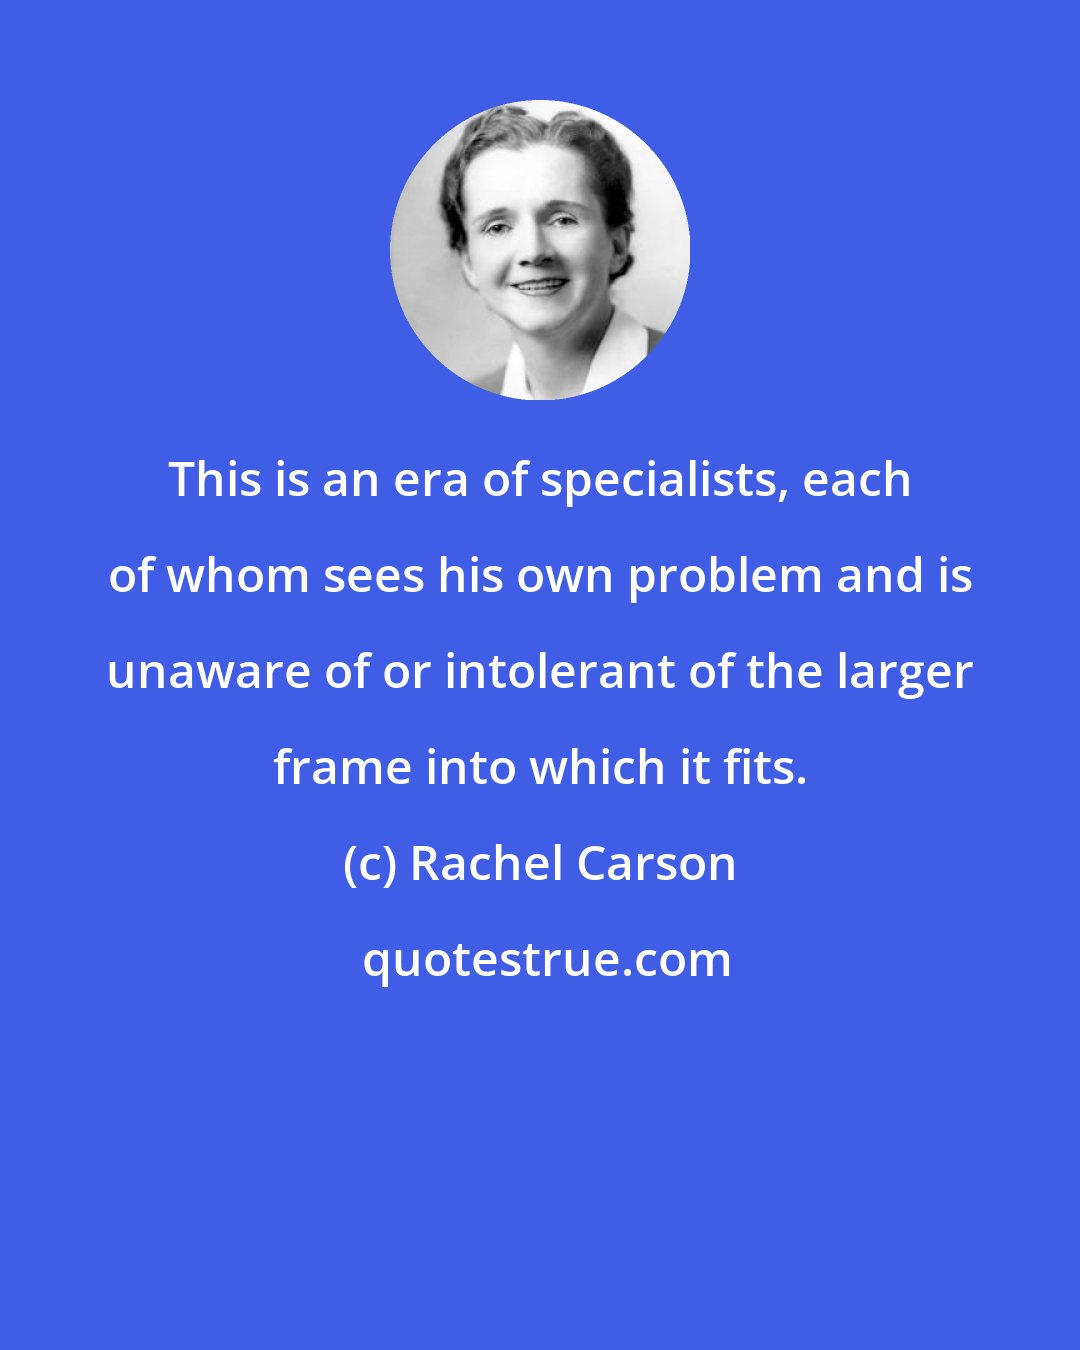 Rachel Carson: This is an era of specialists, each of whom sees his own problem and is unaware of or intolerant of the larger frame into which it fits.